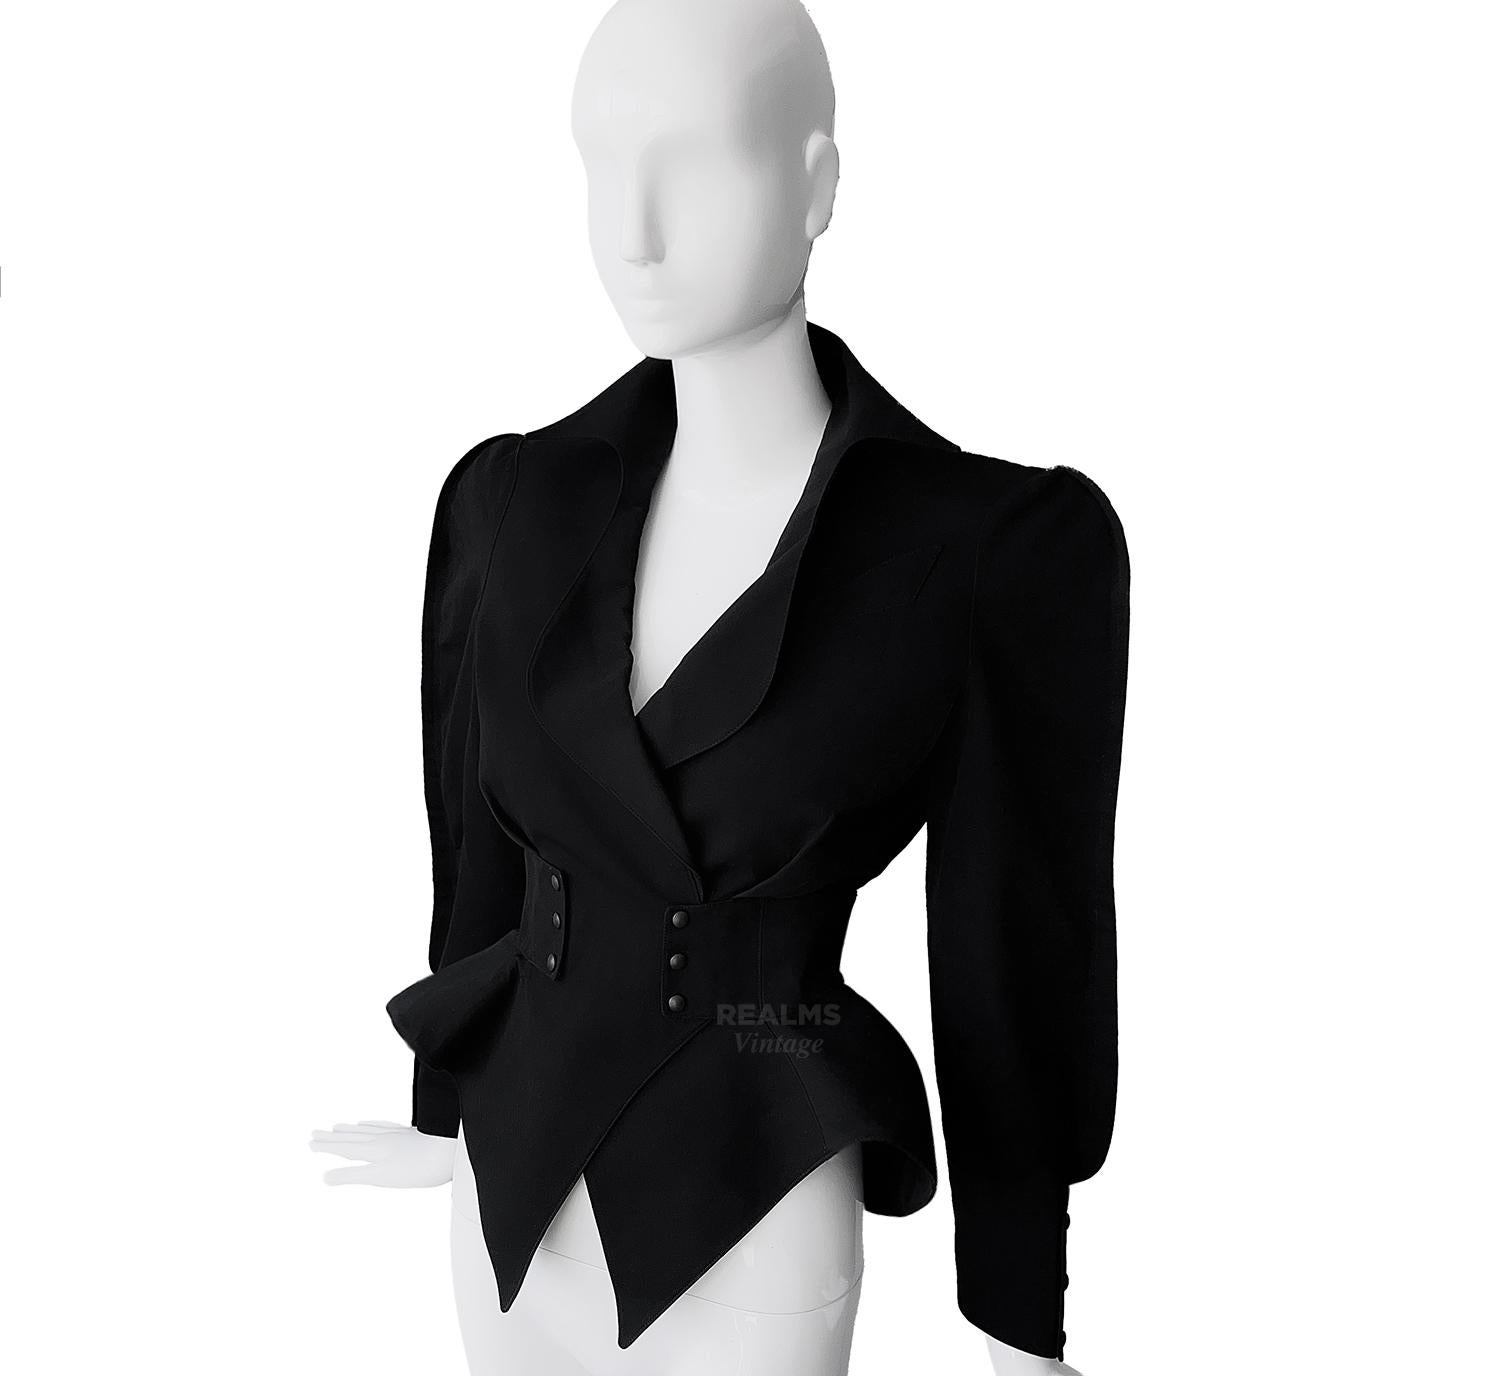 
Stunning rare Thierry Mugler Creation. 
Dramatic sculptural black jacket, a beautiful example of his superb tailoring and unique design. Dramatic pointy collar, fitted waist and exaggerated peplum hips. Closes with press buttons on the waist. Also